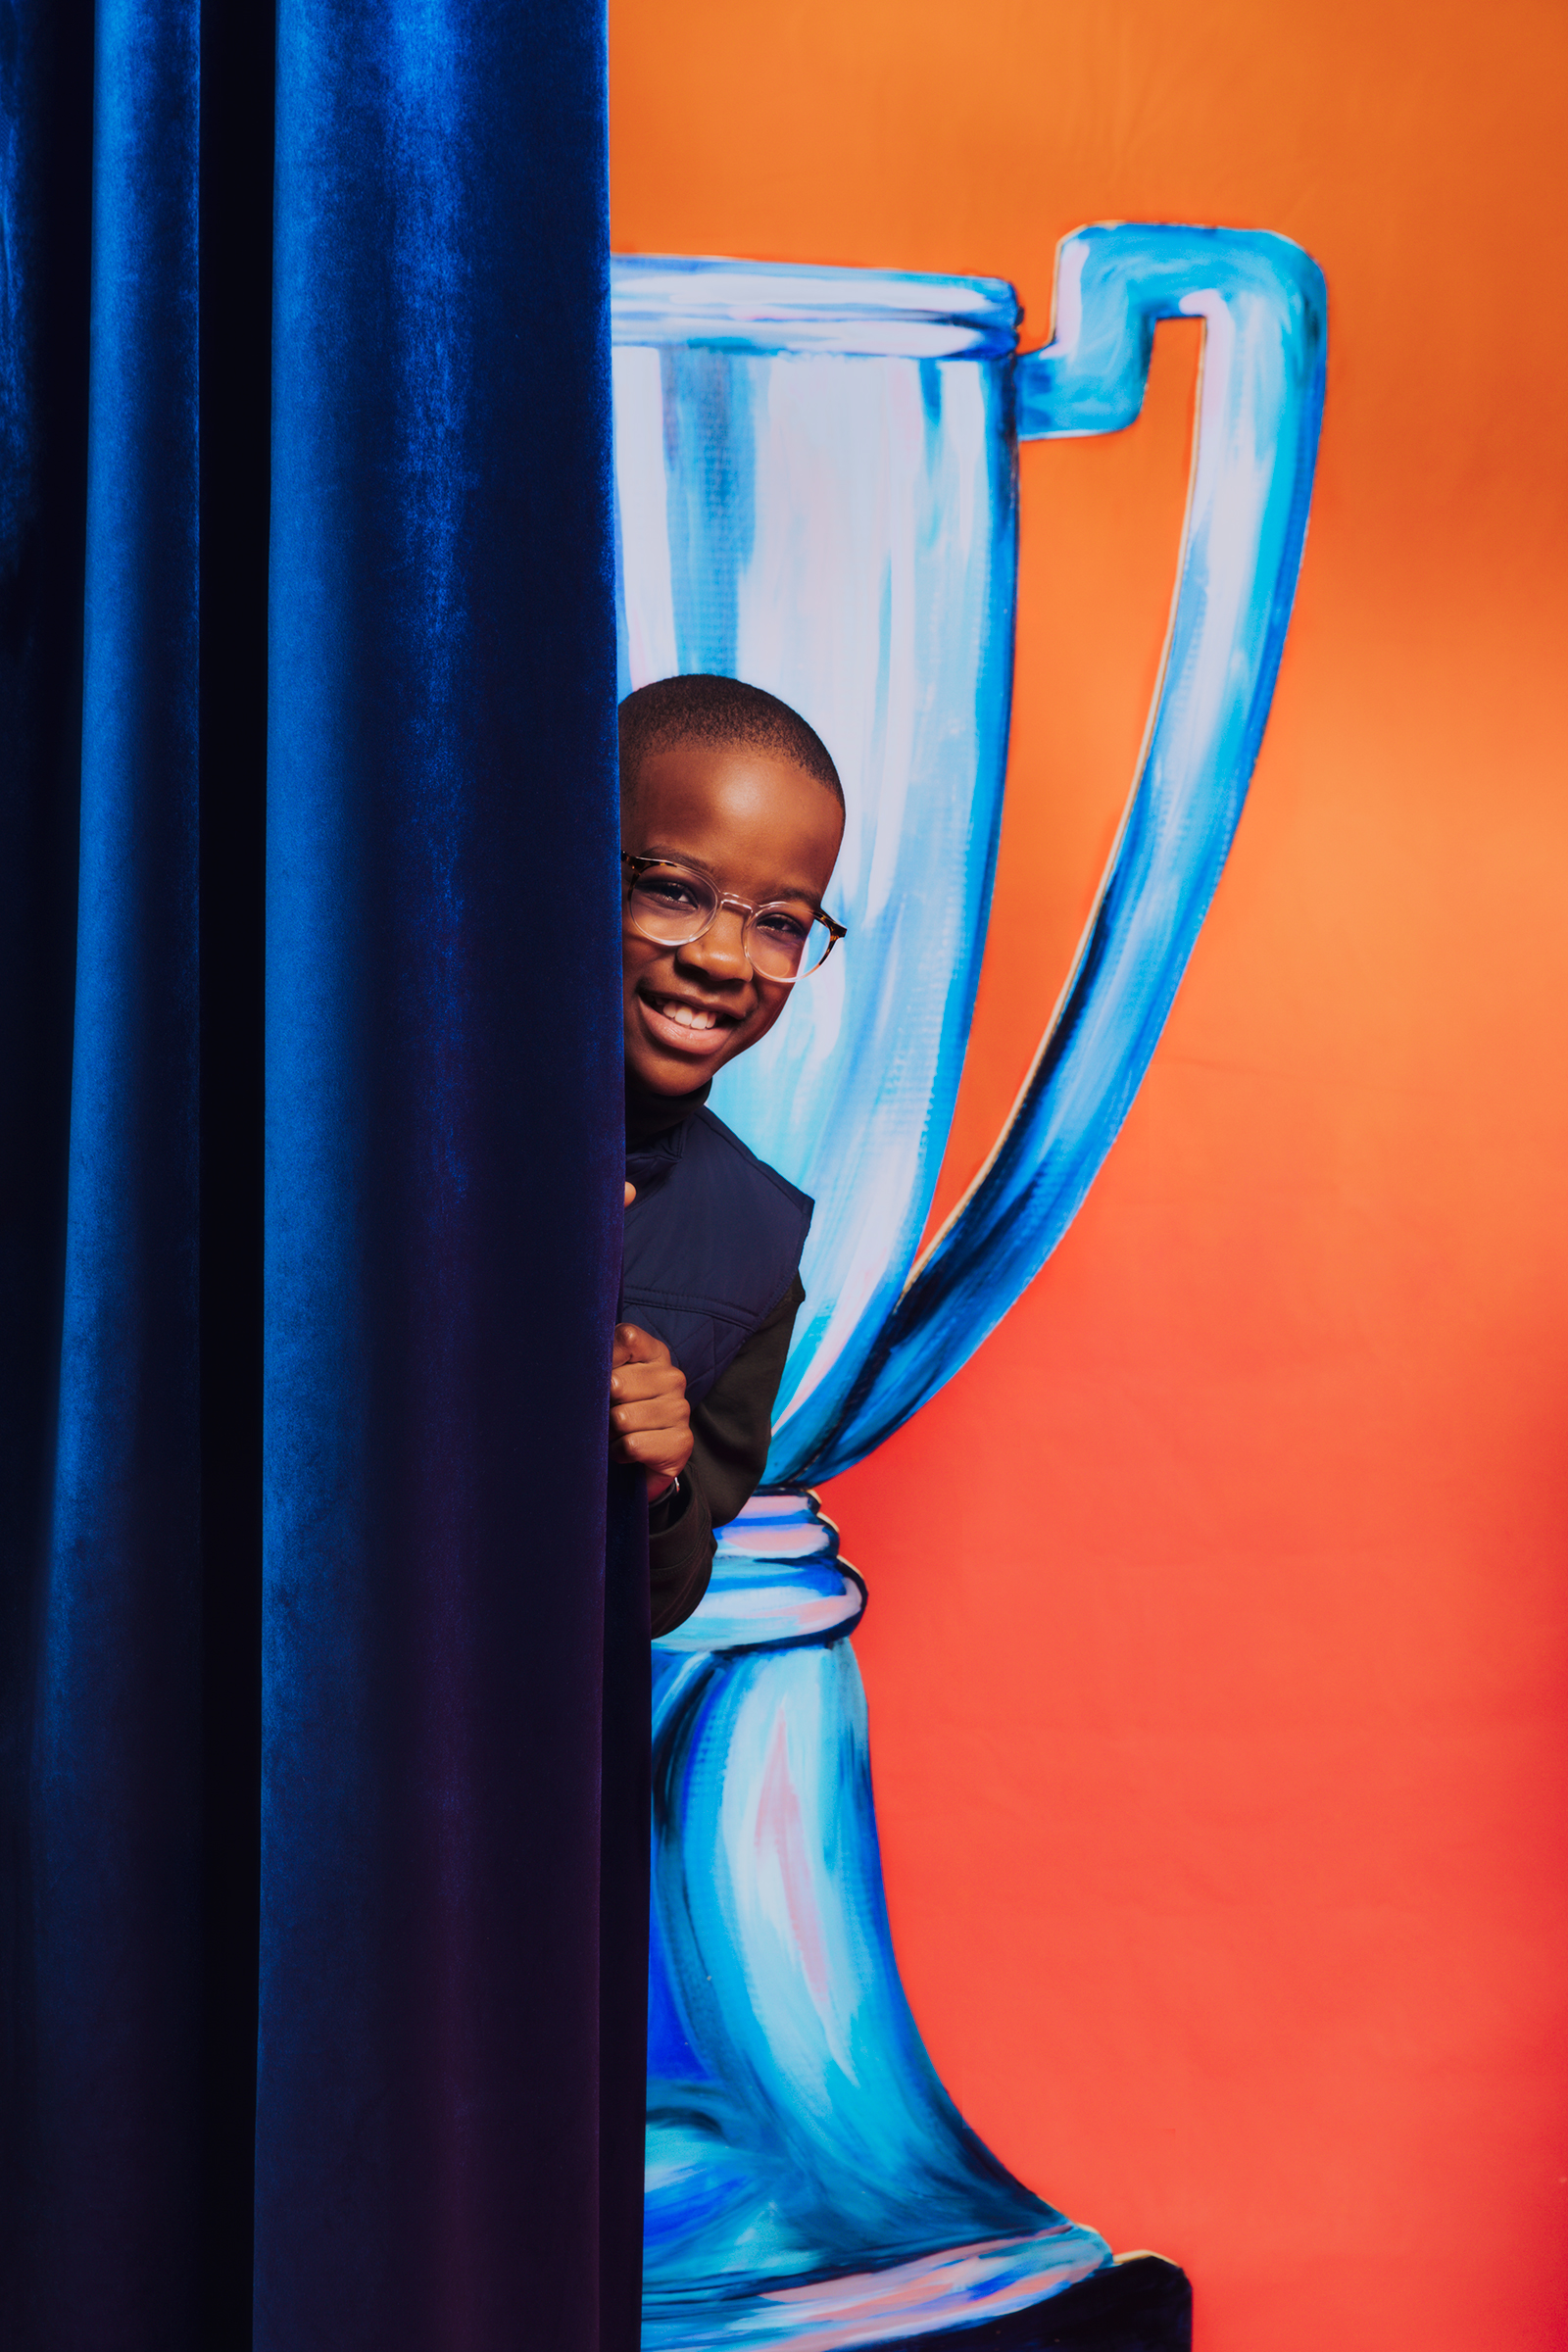 Orion Jean playfully hides behind the curtains on set on December 16, 2021. (Justin J Wee for TIME)